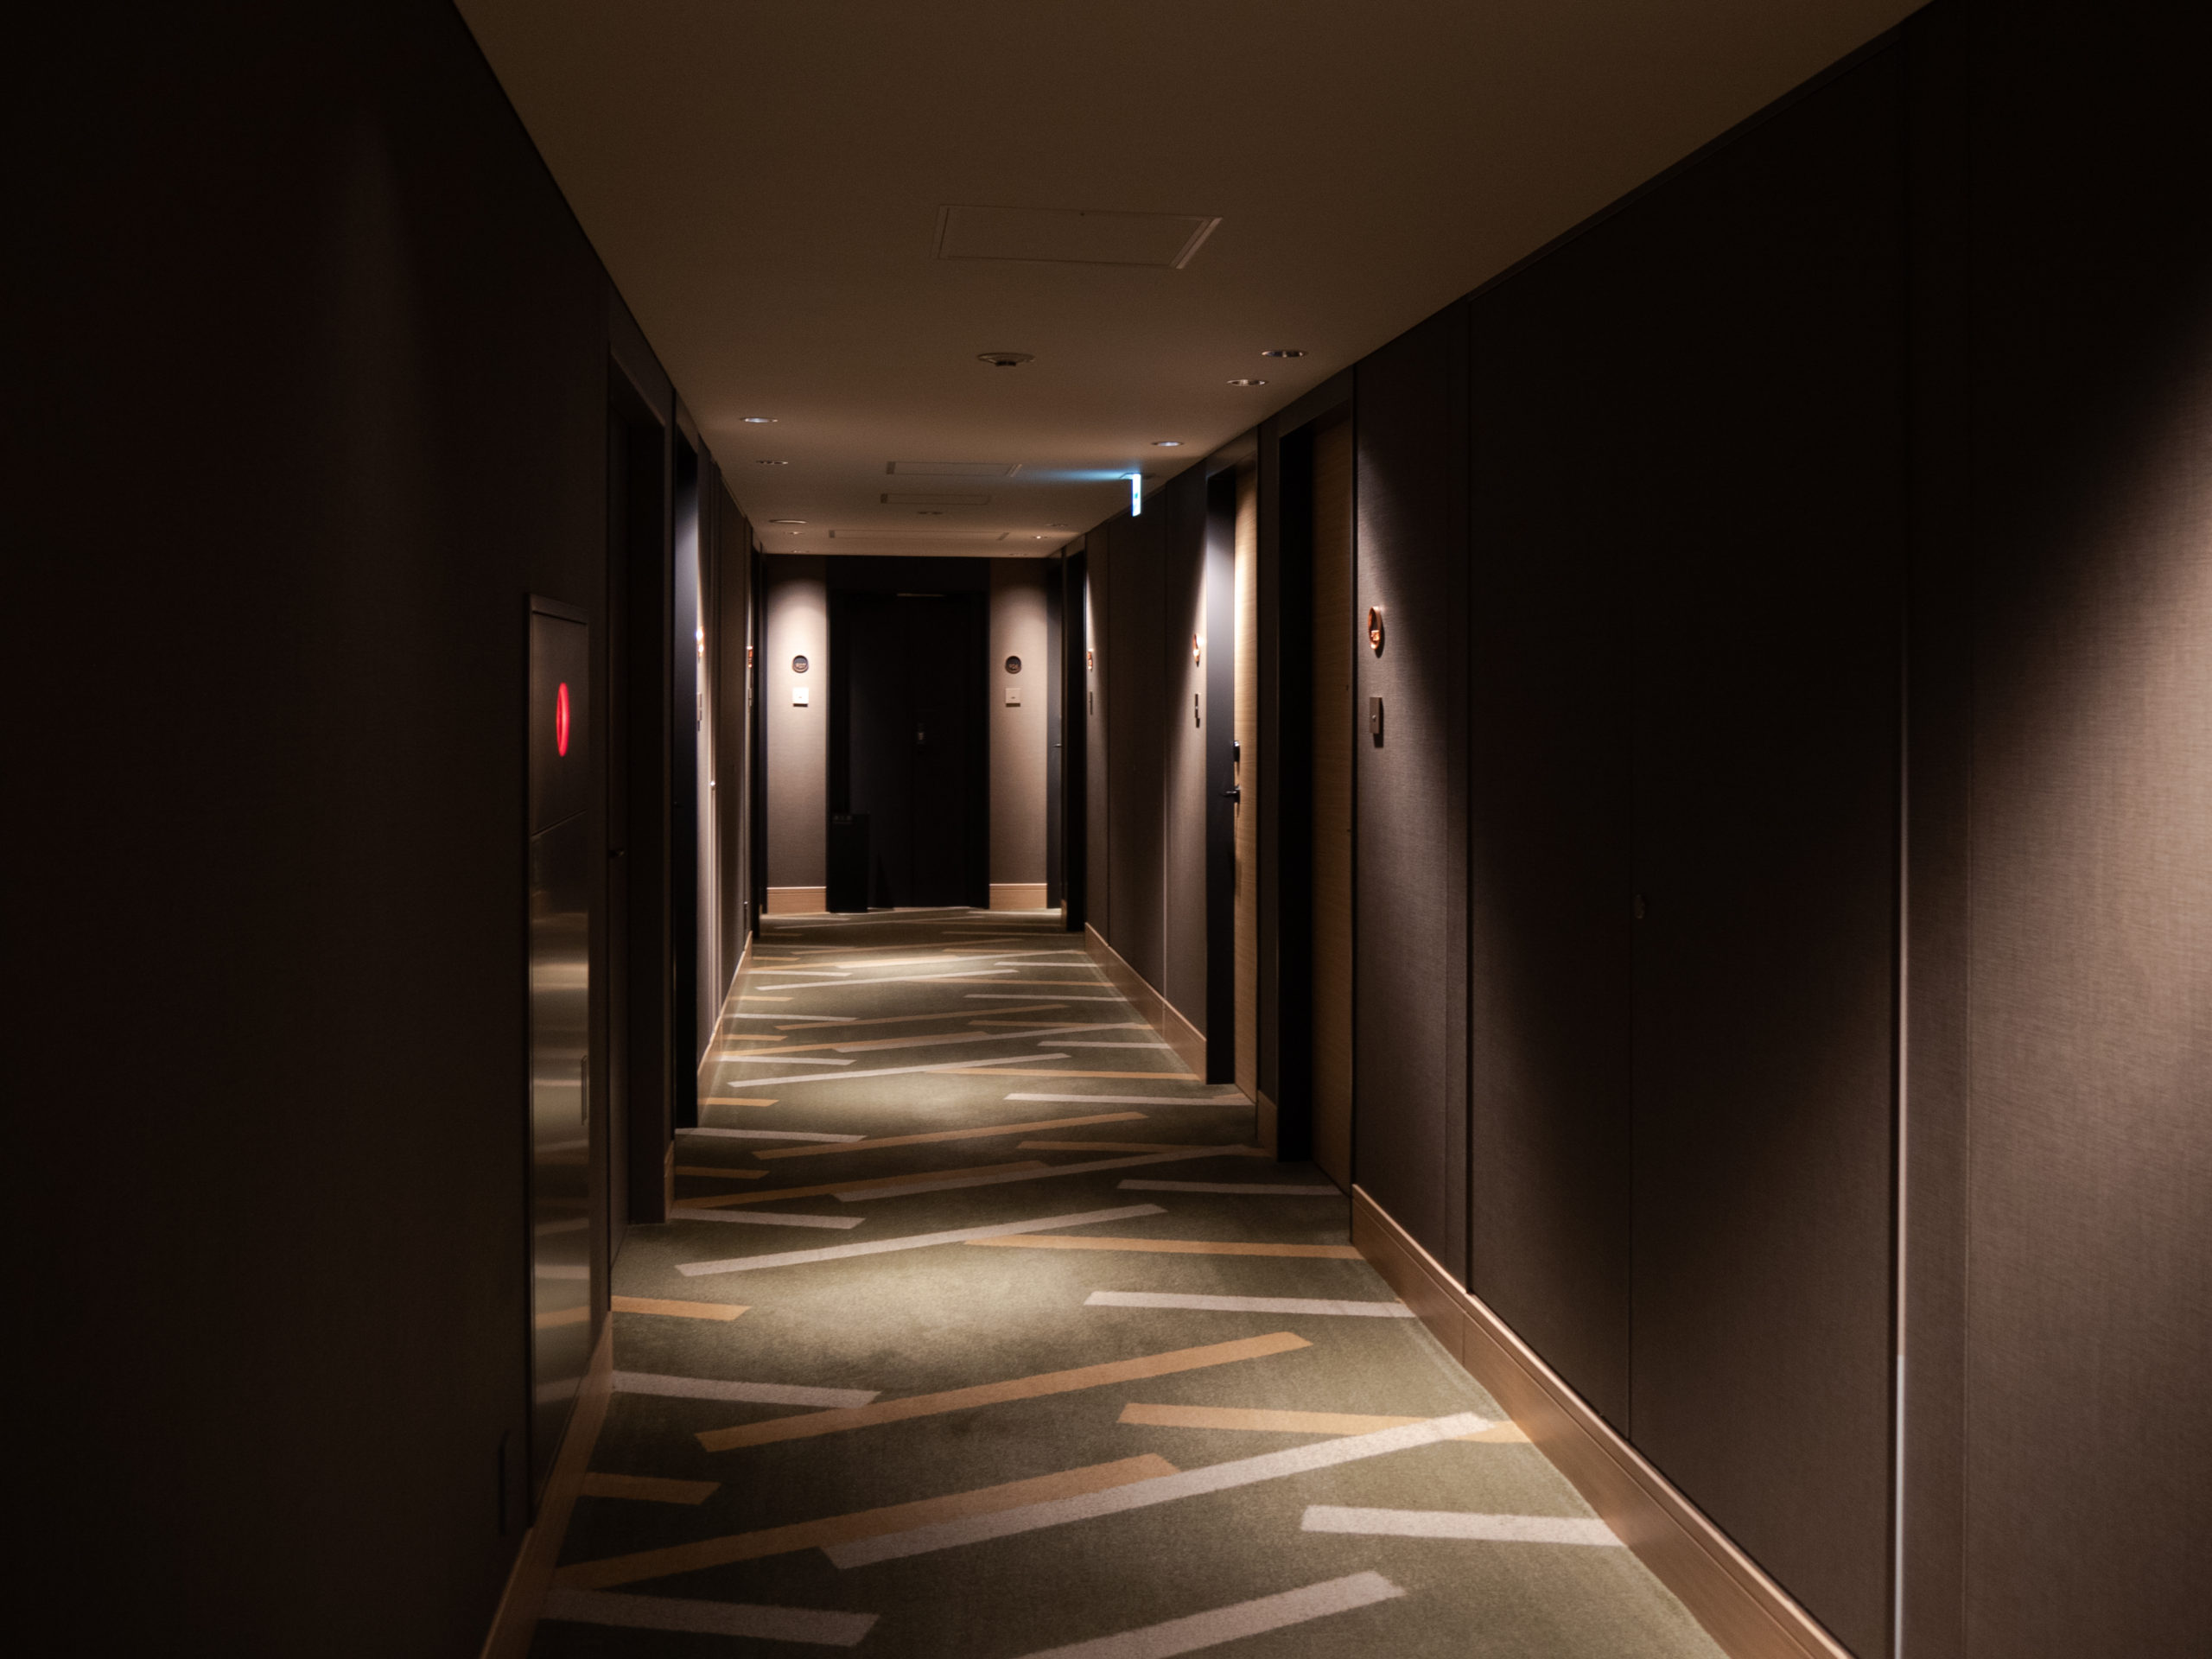 The pattern on the hallway carpet is a reoccurring motif throughout the hotel The fragrance of incense is soothing, and the moody lighting allows me to feel like I really have stepped out of the everyday into a special dimension, where time is irrelevant. 